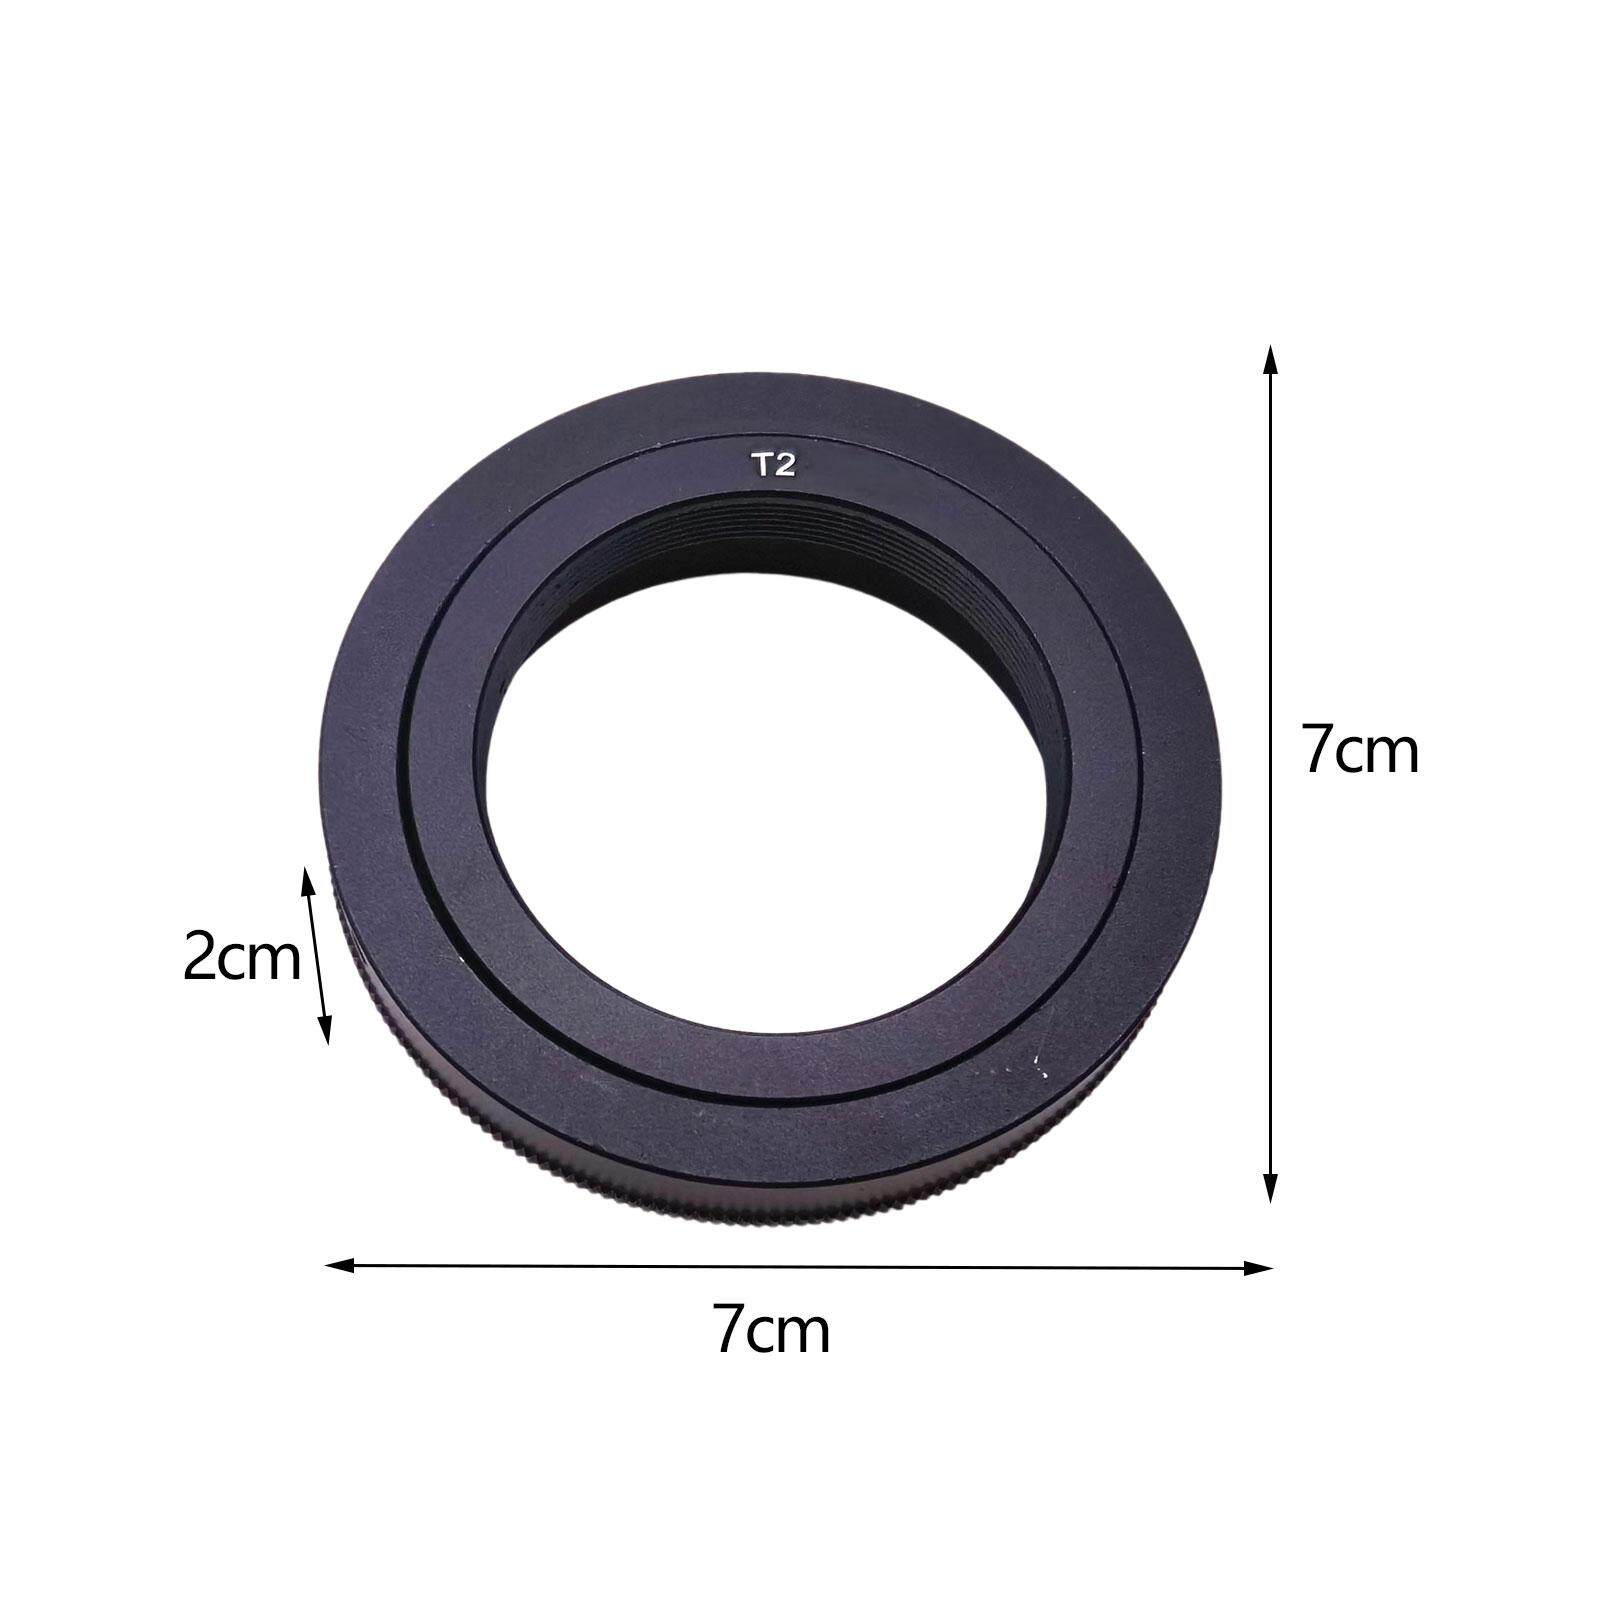 Baoblaze T2 Mount Adapter Ring with Wrench Camera Adapter Ring for EOS